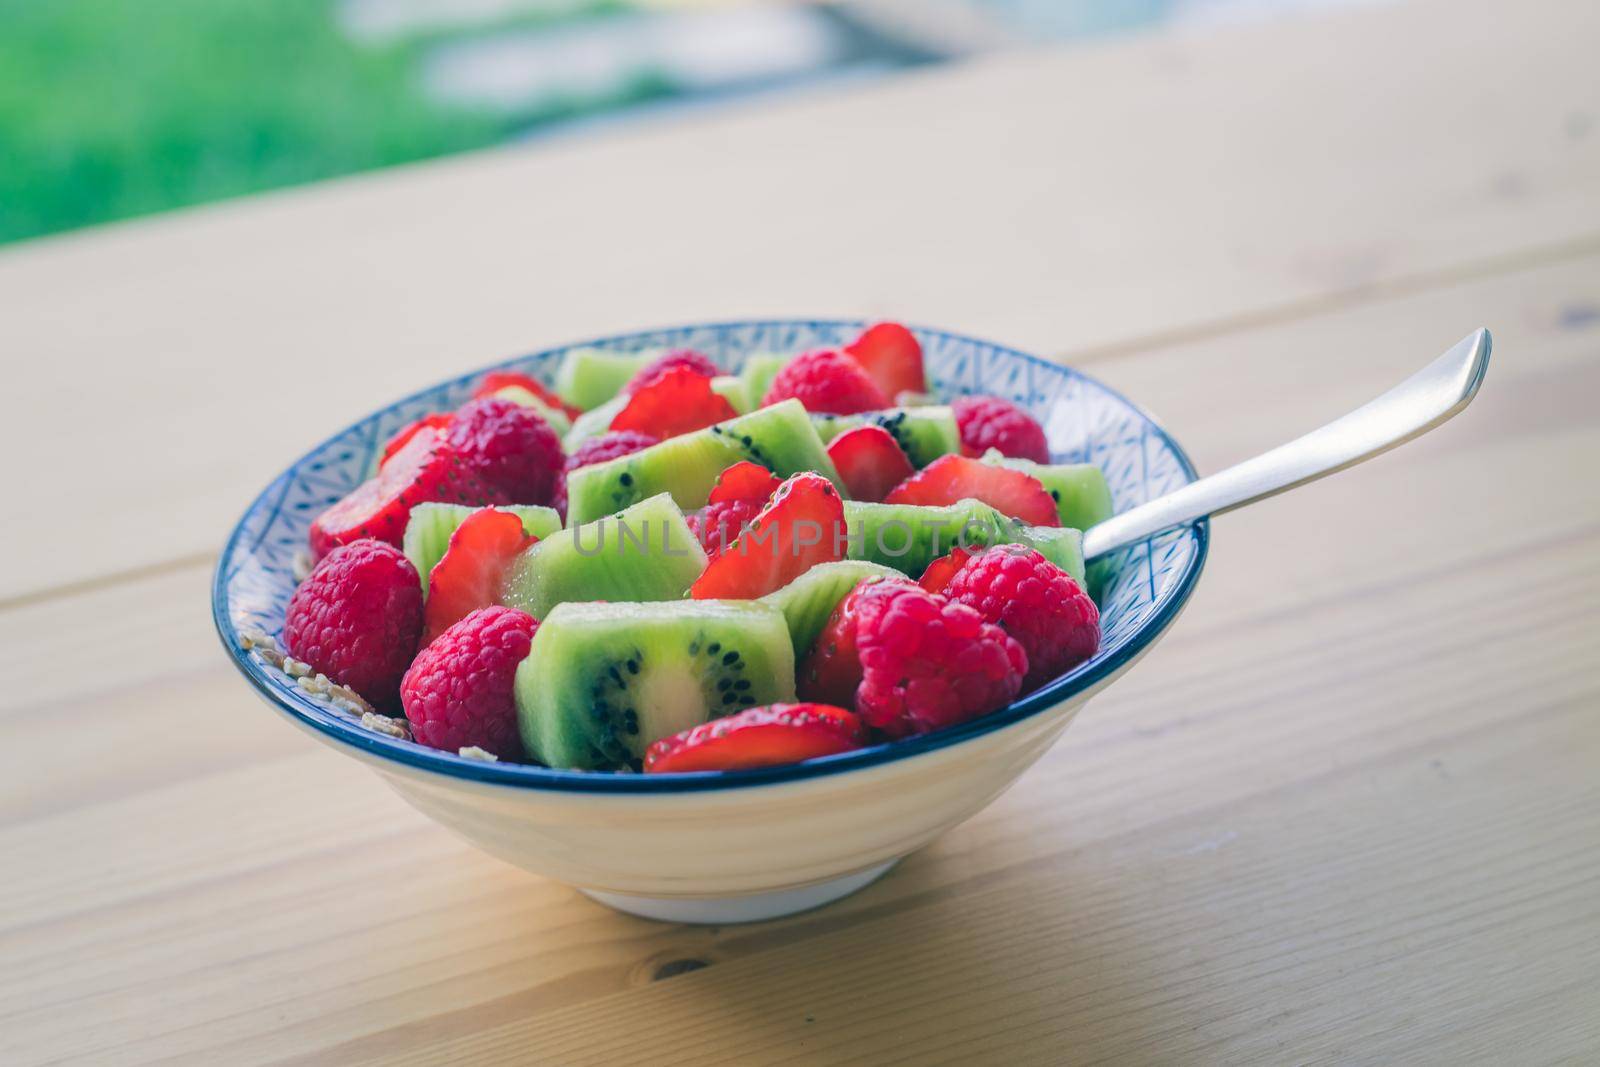 Breakfast fruit bowl with strawberries and kiwis, close up. Healthy lifestyle for vegetarians. by Daxenbichler